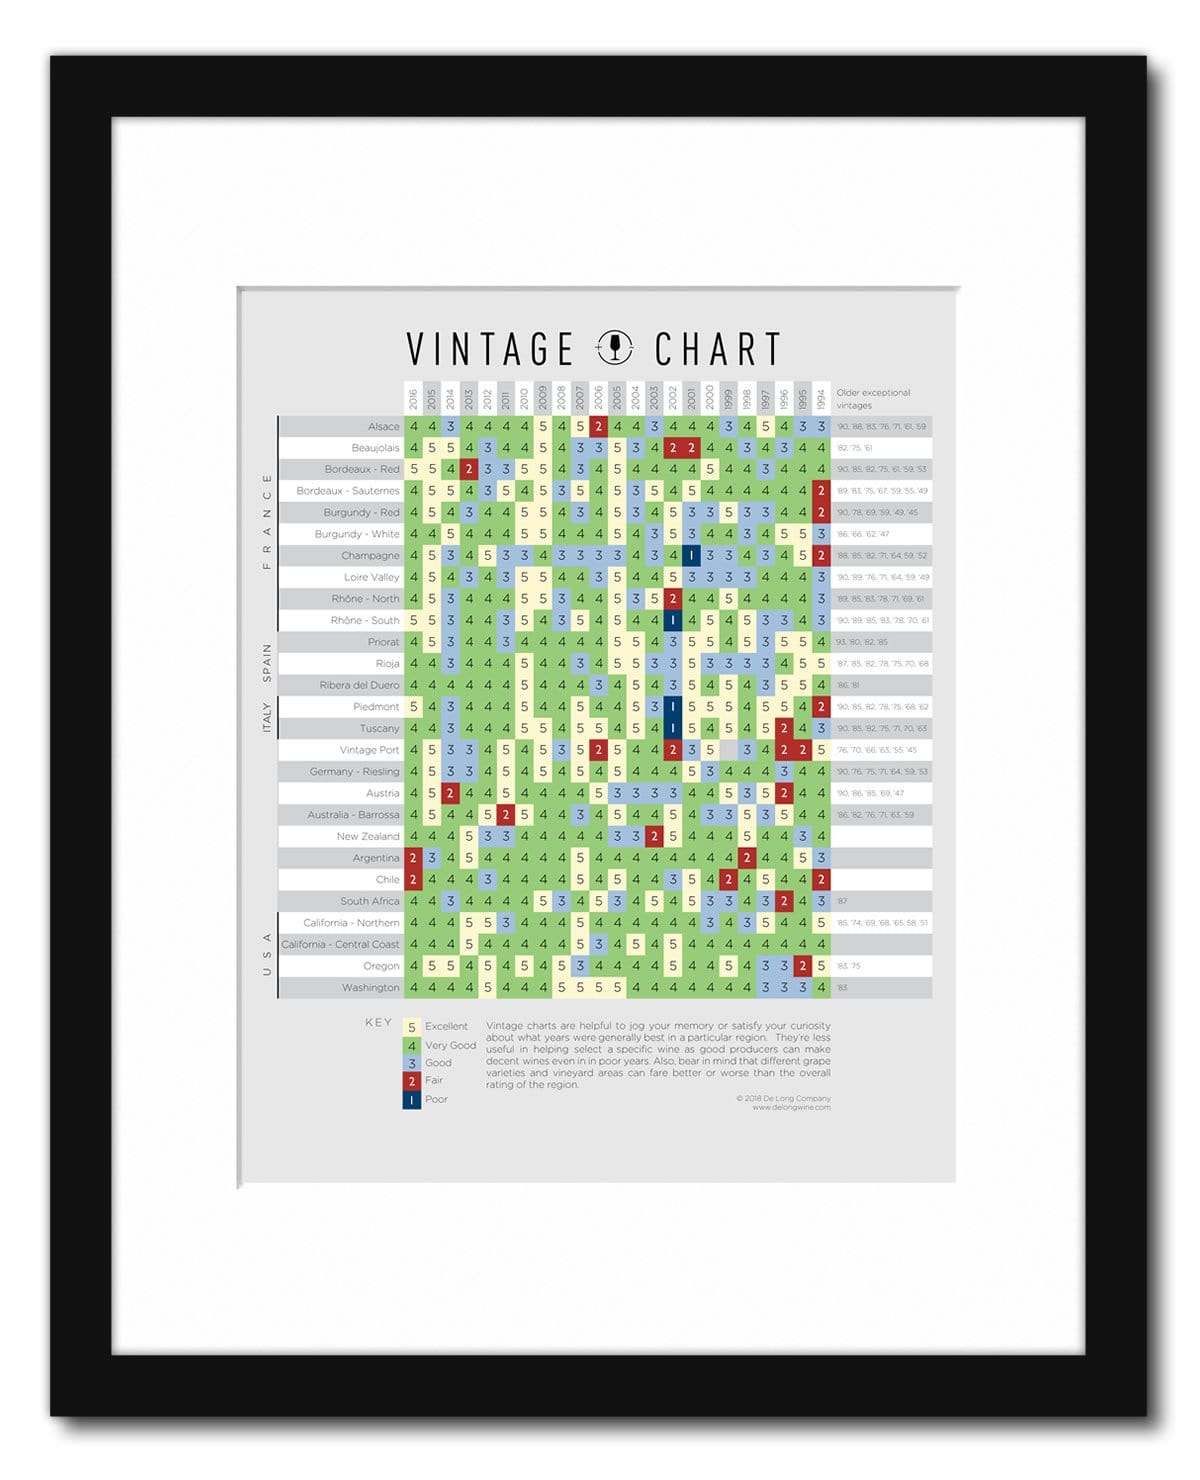 South African Wine Vintage Chart